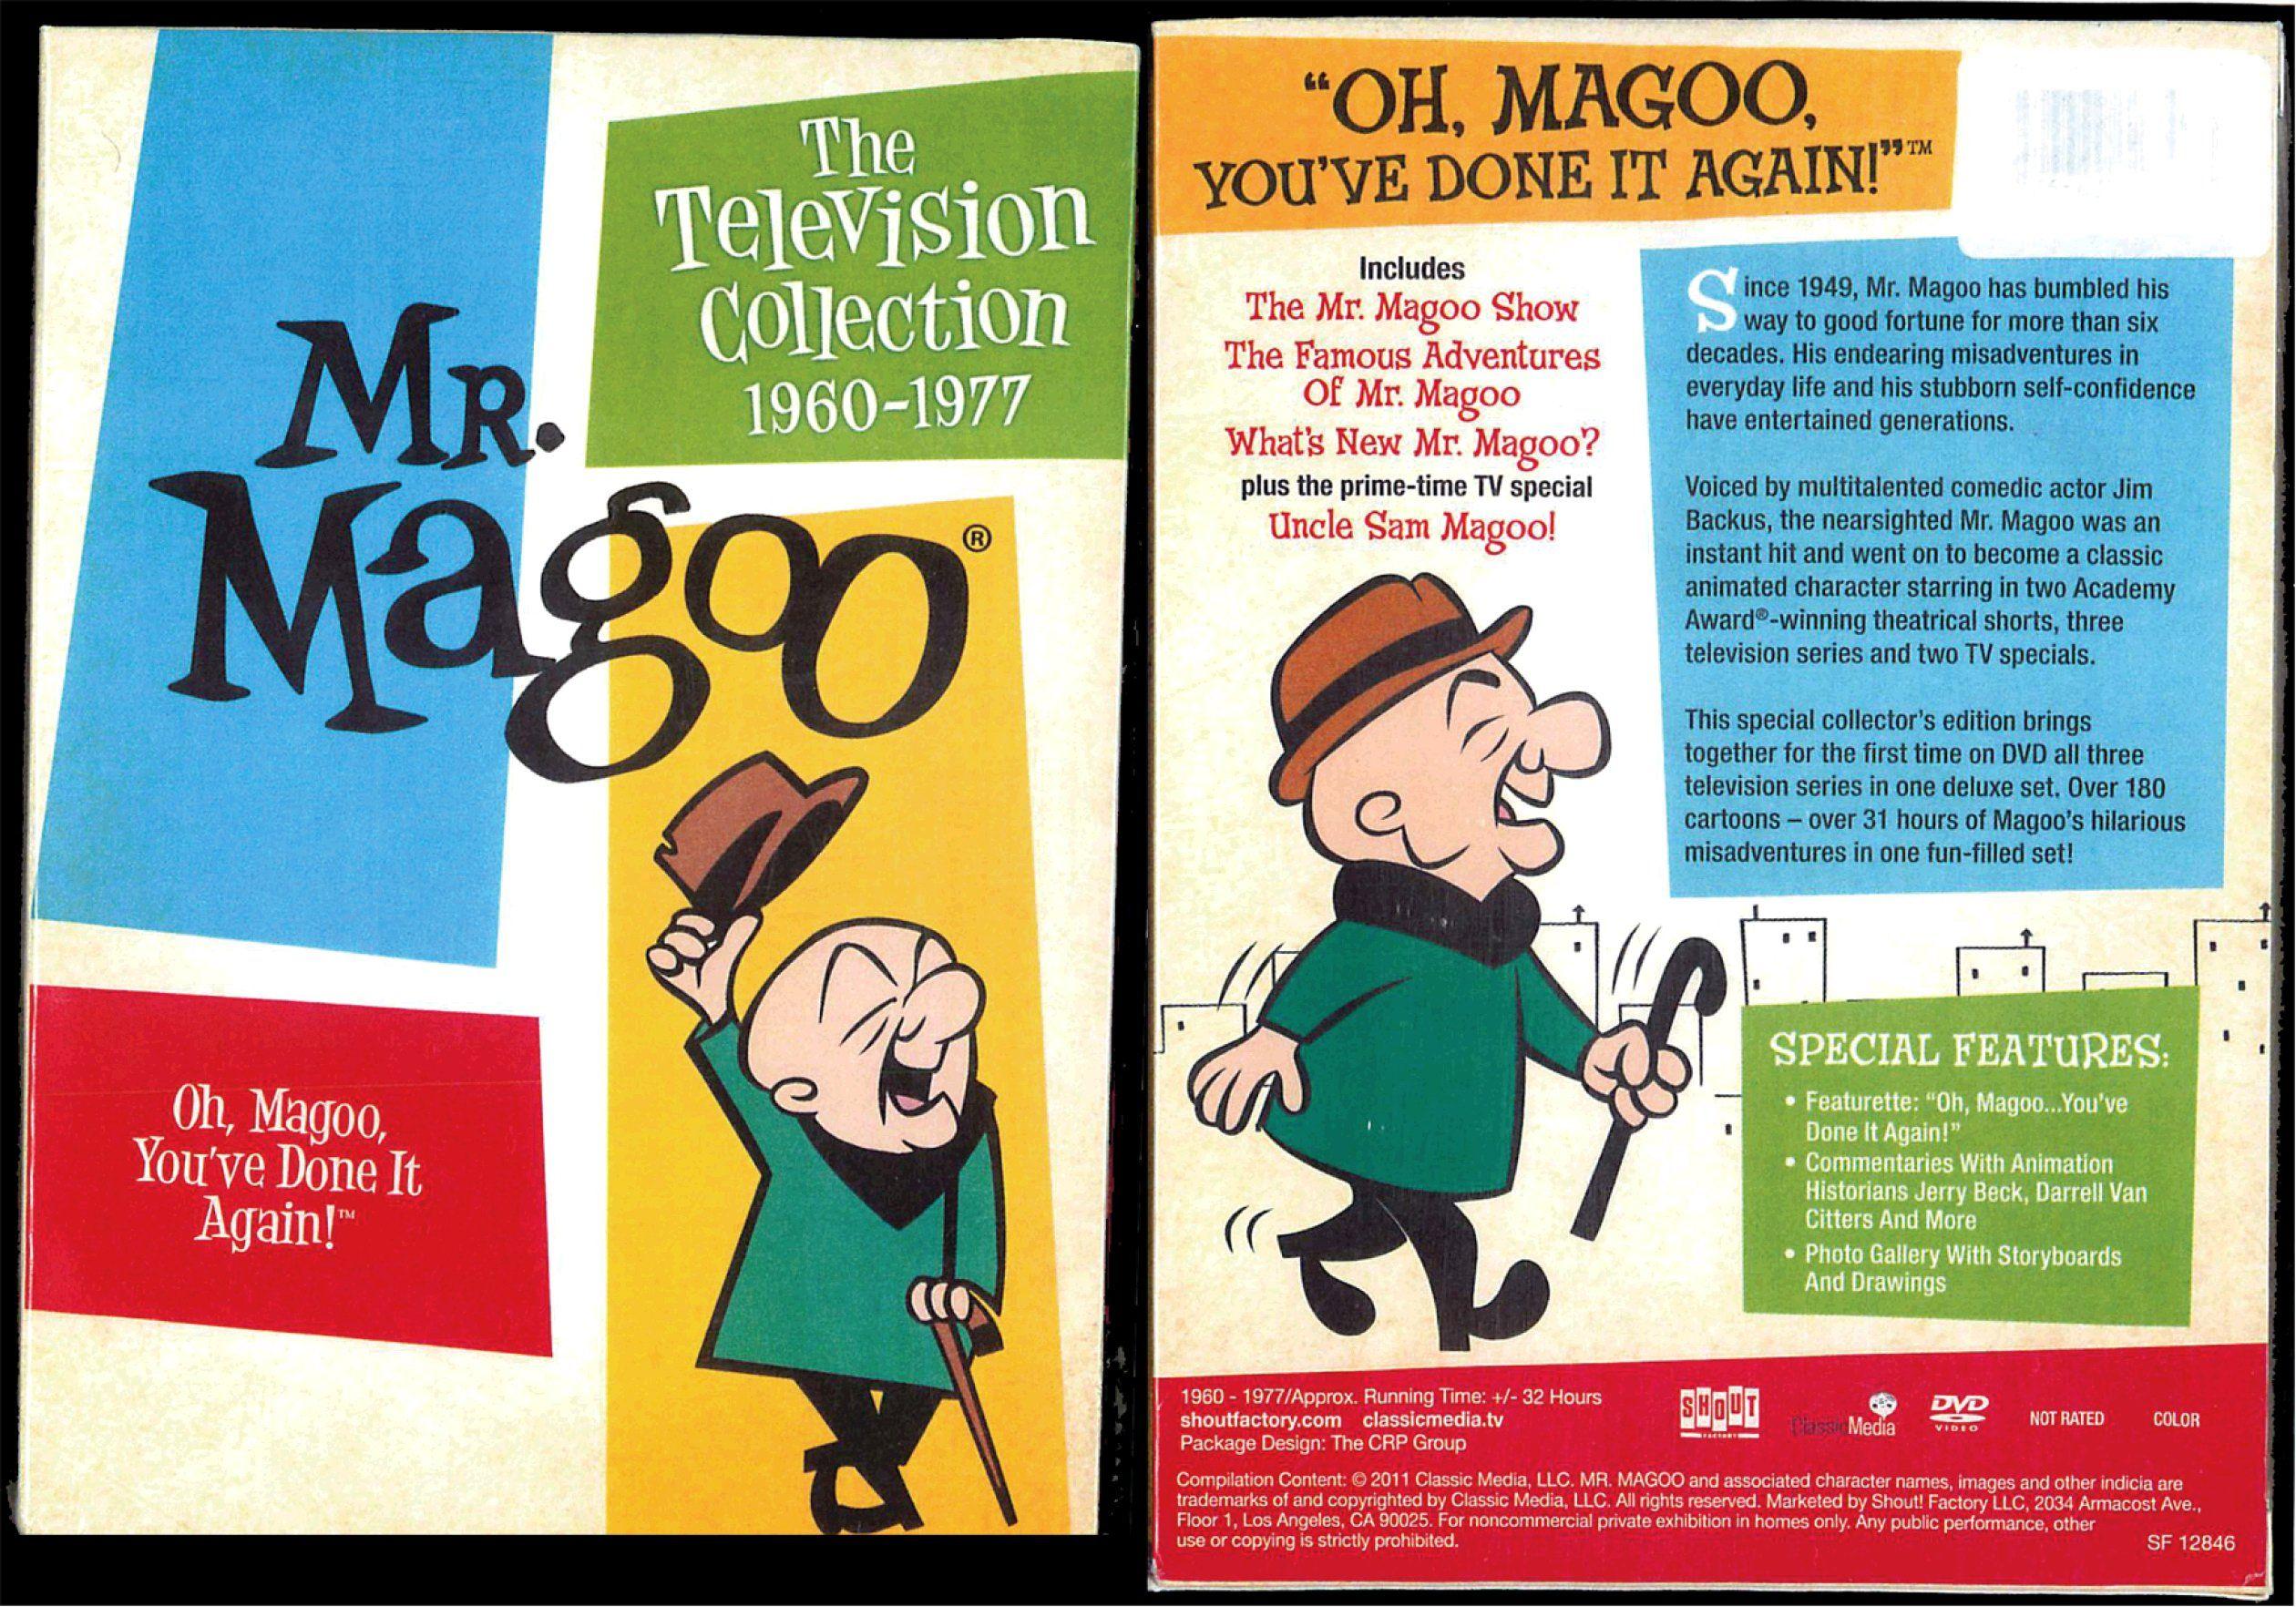 MR. MAGOO Details, a Report by Trademark Bank. Calendar Your Mark